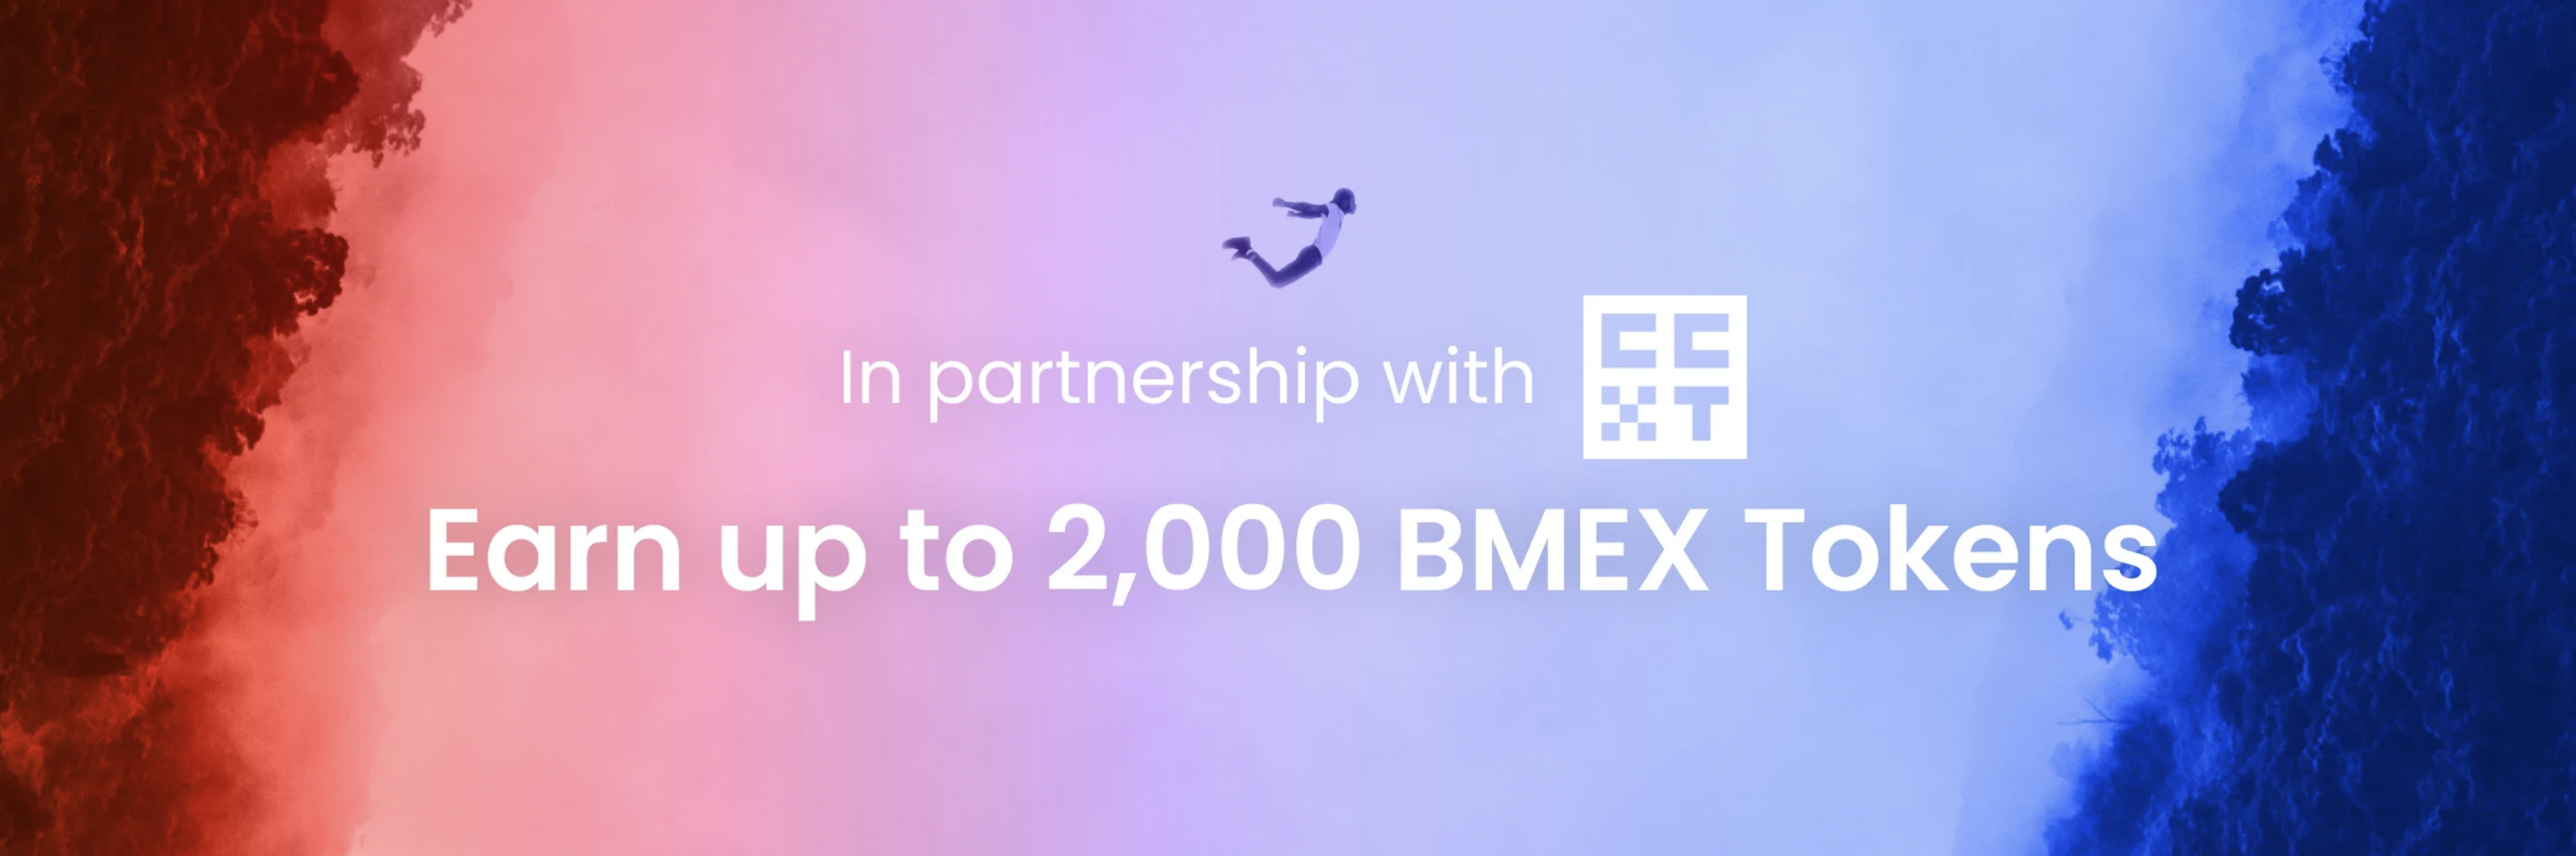 Earn Up to 2,000 BMEX Tokens This November